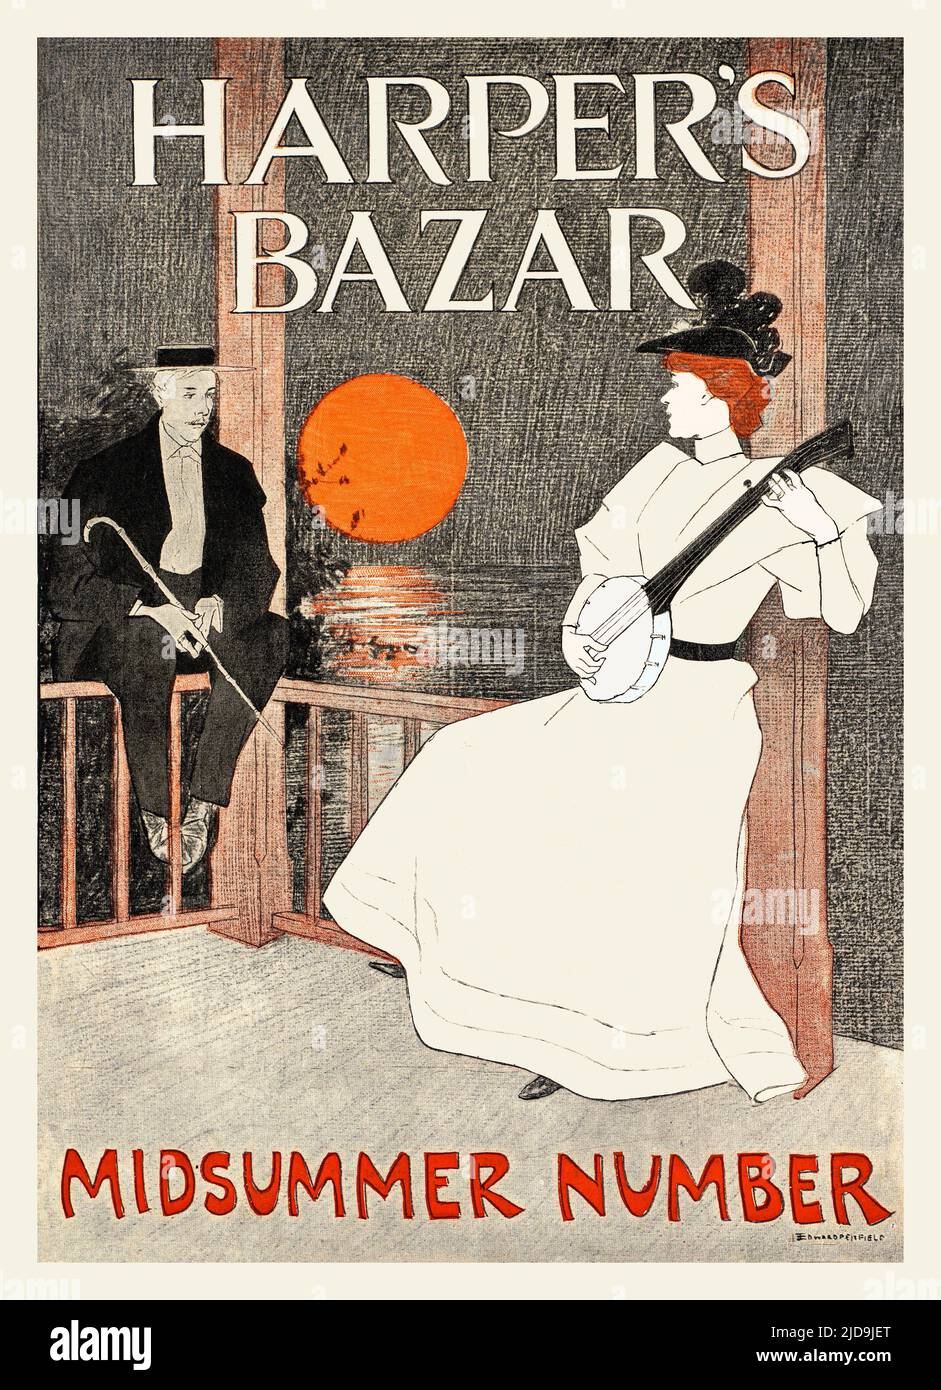 A turn of the 20th century illustration by Edward Penfield (1866-1925) considered by many to be the father of the American poster. Featuring a young woman playing her banjo and entertaining an older man as the sun goes down. Harper’s Magazine, the oldest general-interest monthly in America. Stock Photo